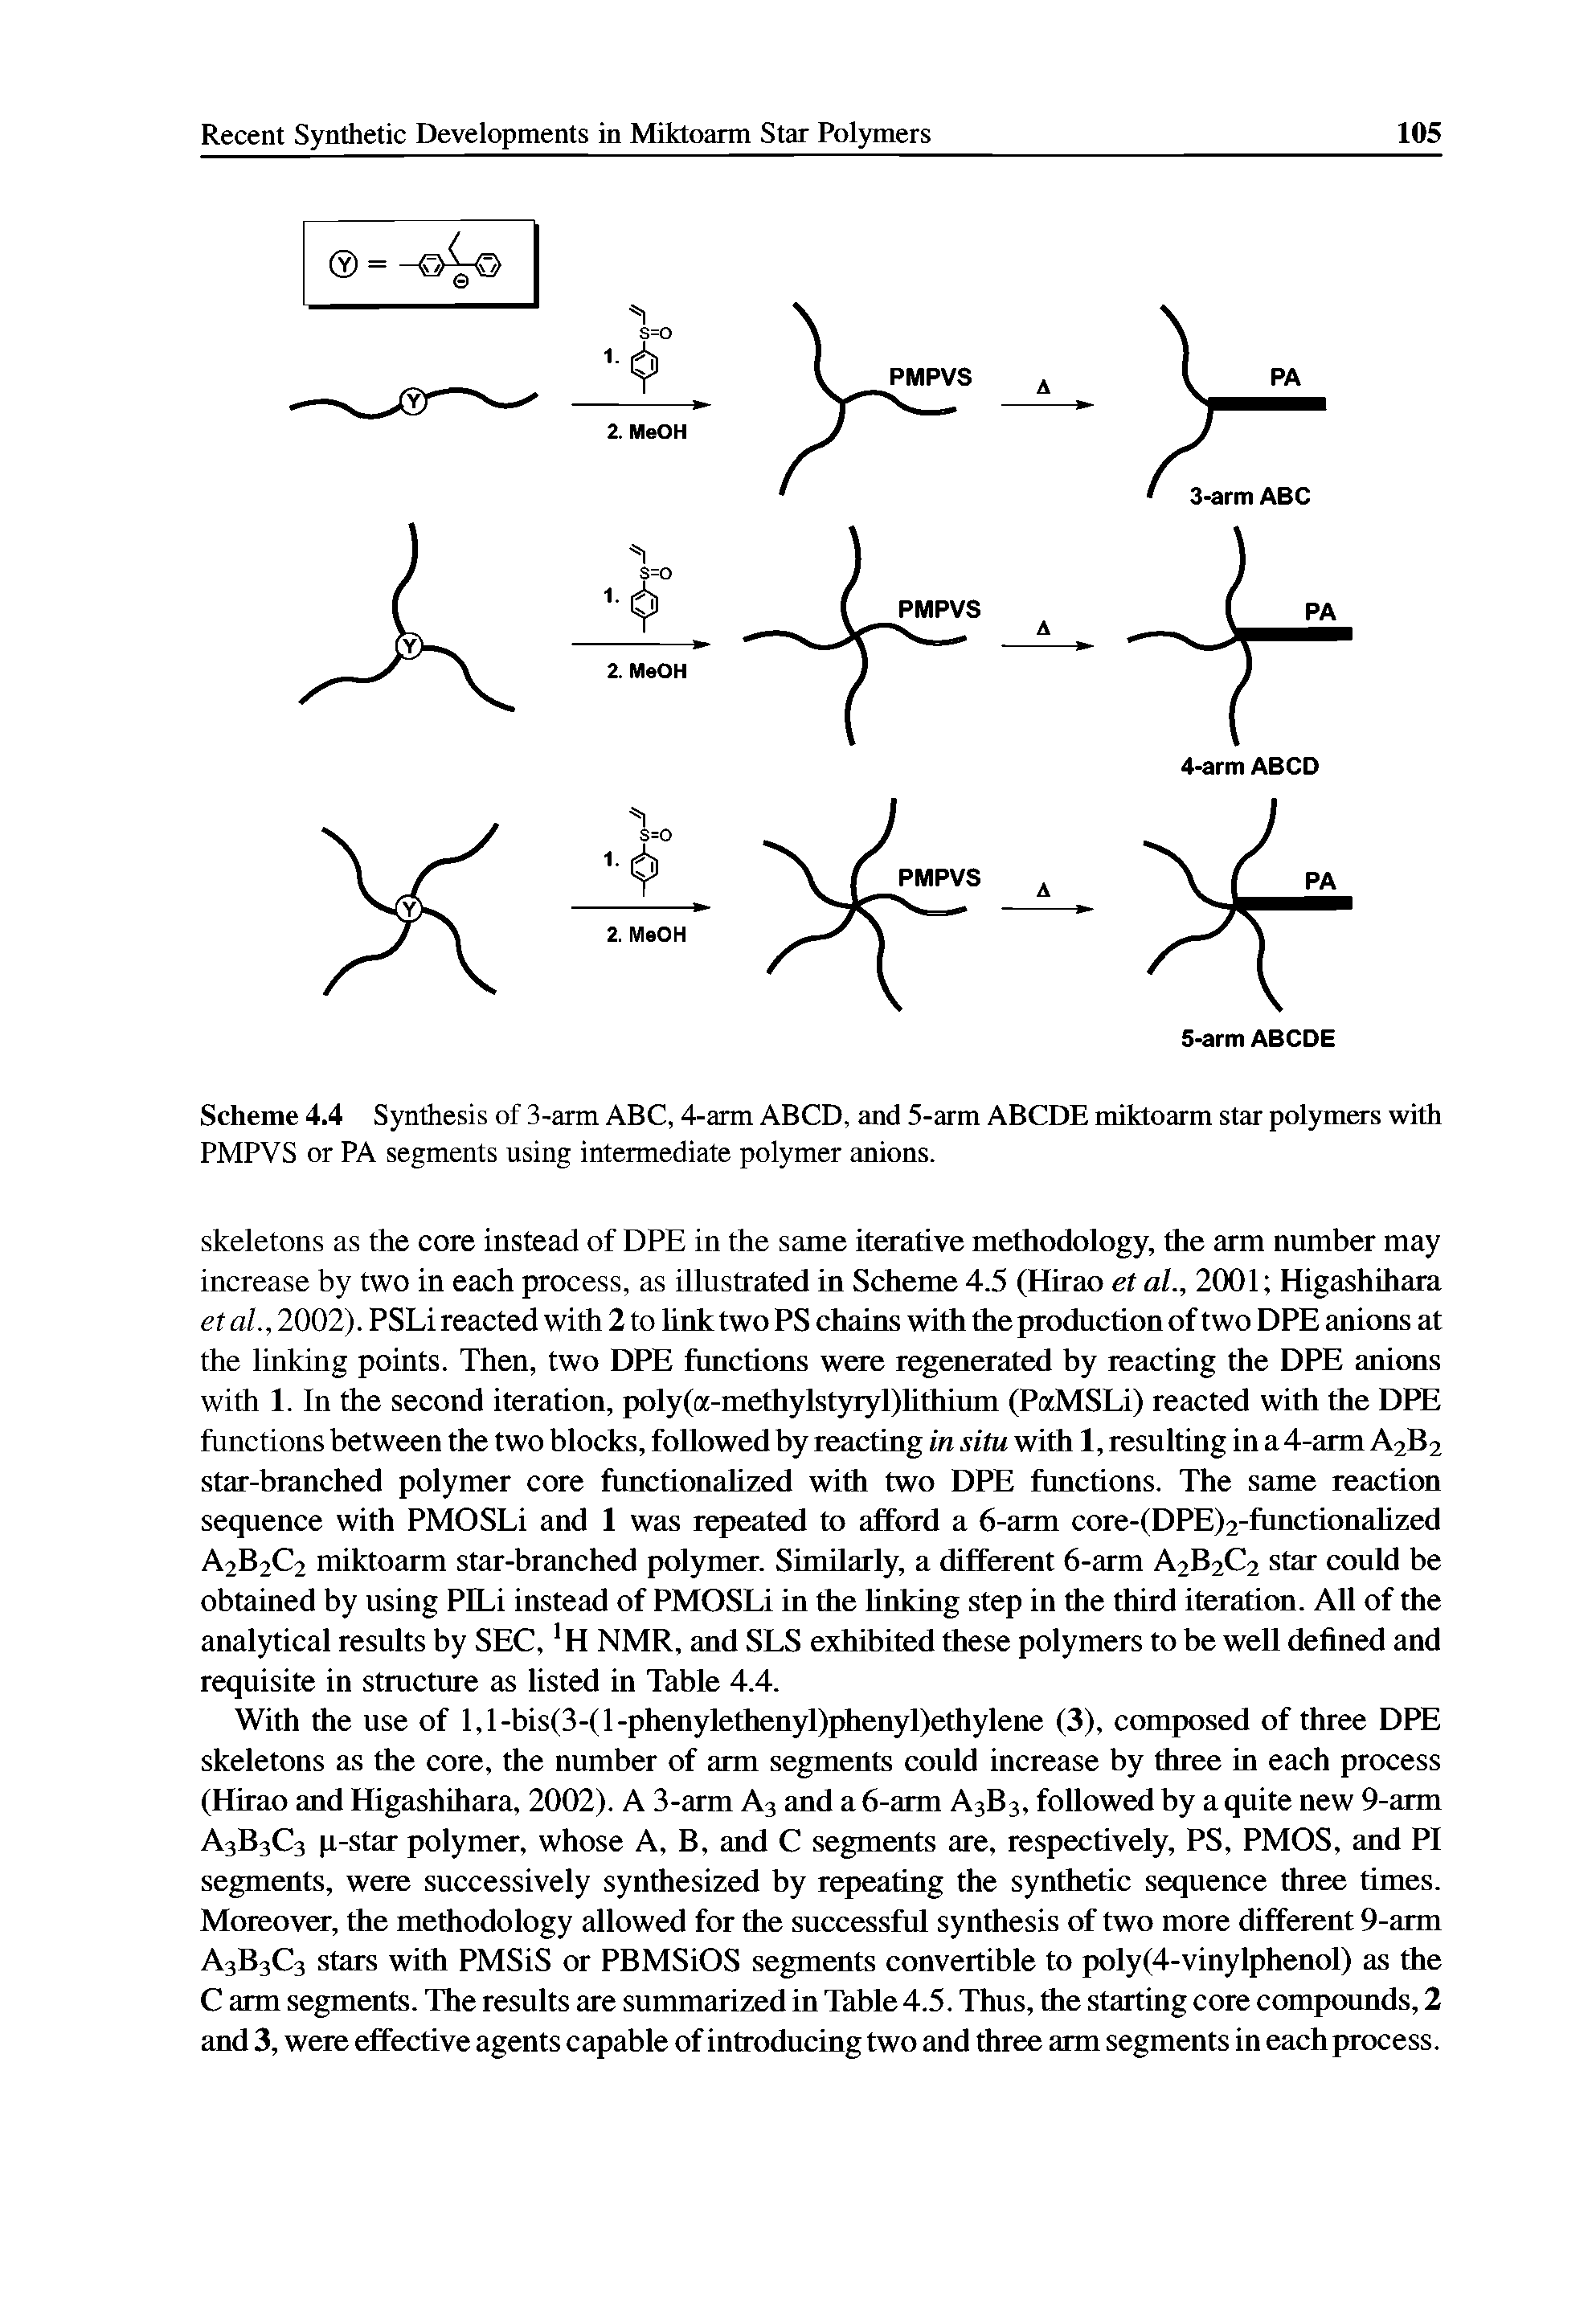 Scheme 4.4 Synthesis of 3-arm ABC, 4-arm ABCD, and 5-arm ABCDE miktoarm star polymers with PMPVS or PA segments using intermediate polymer anions.